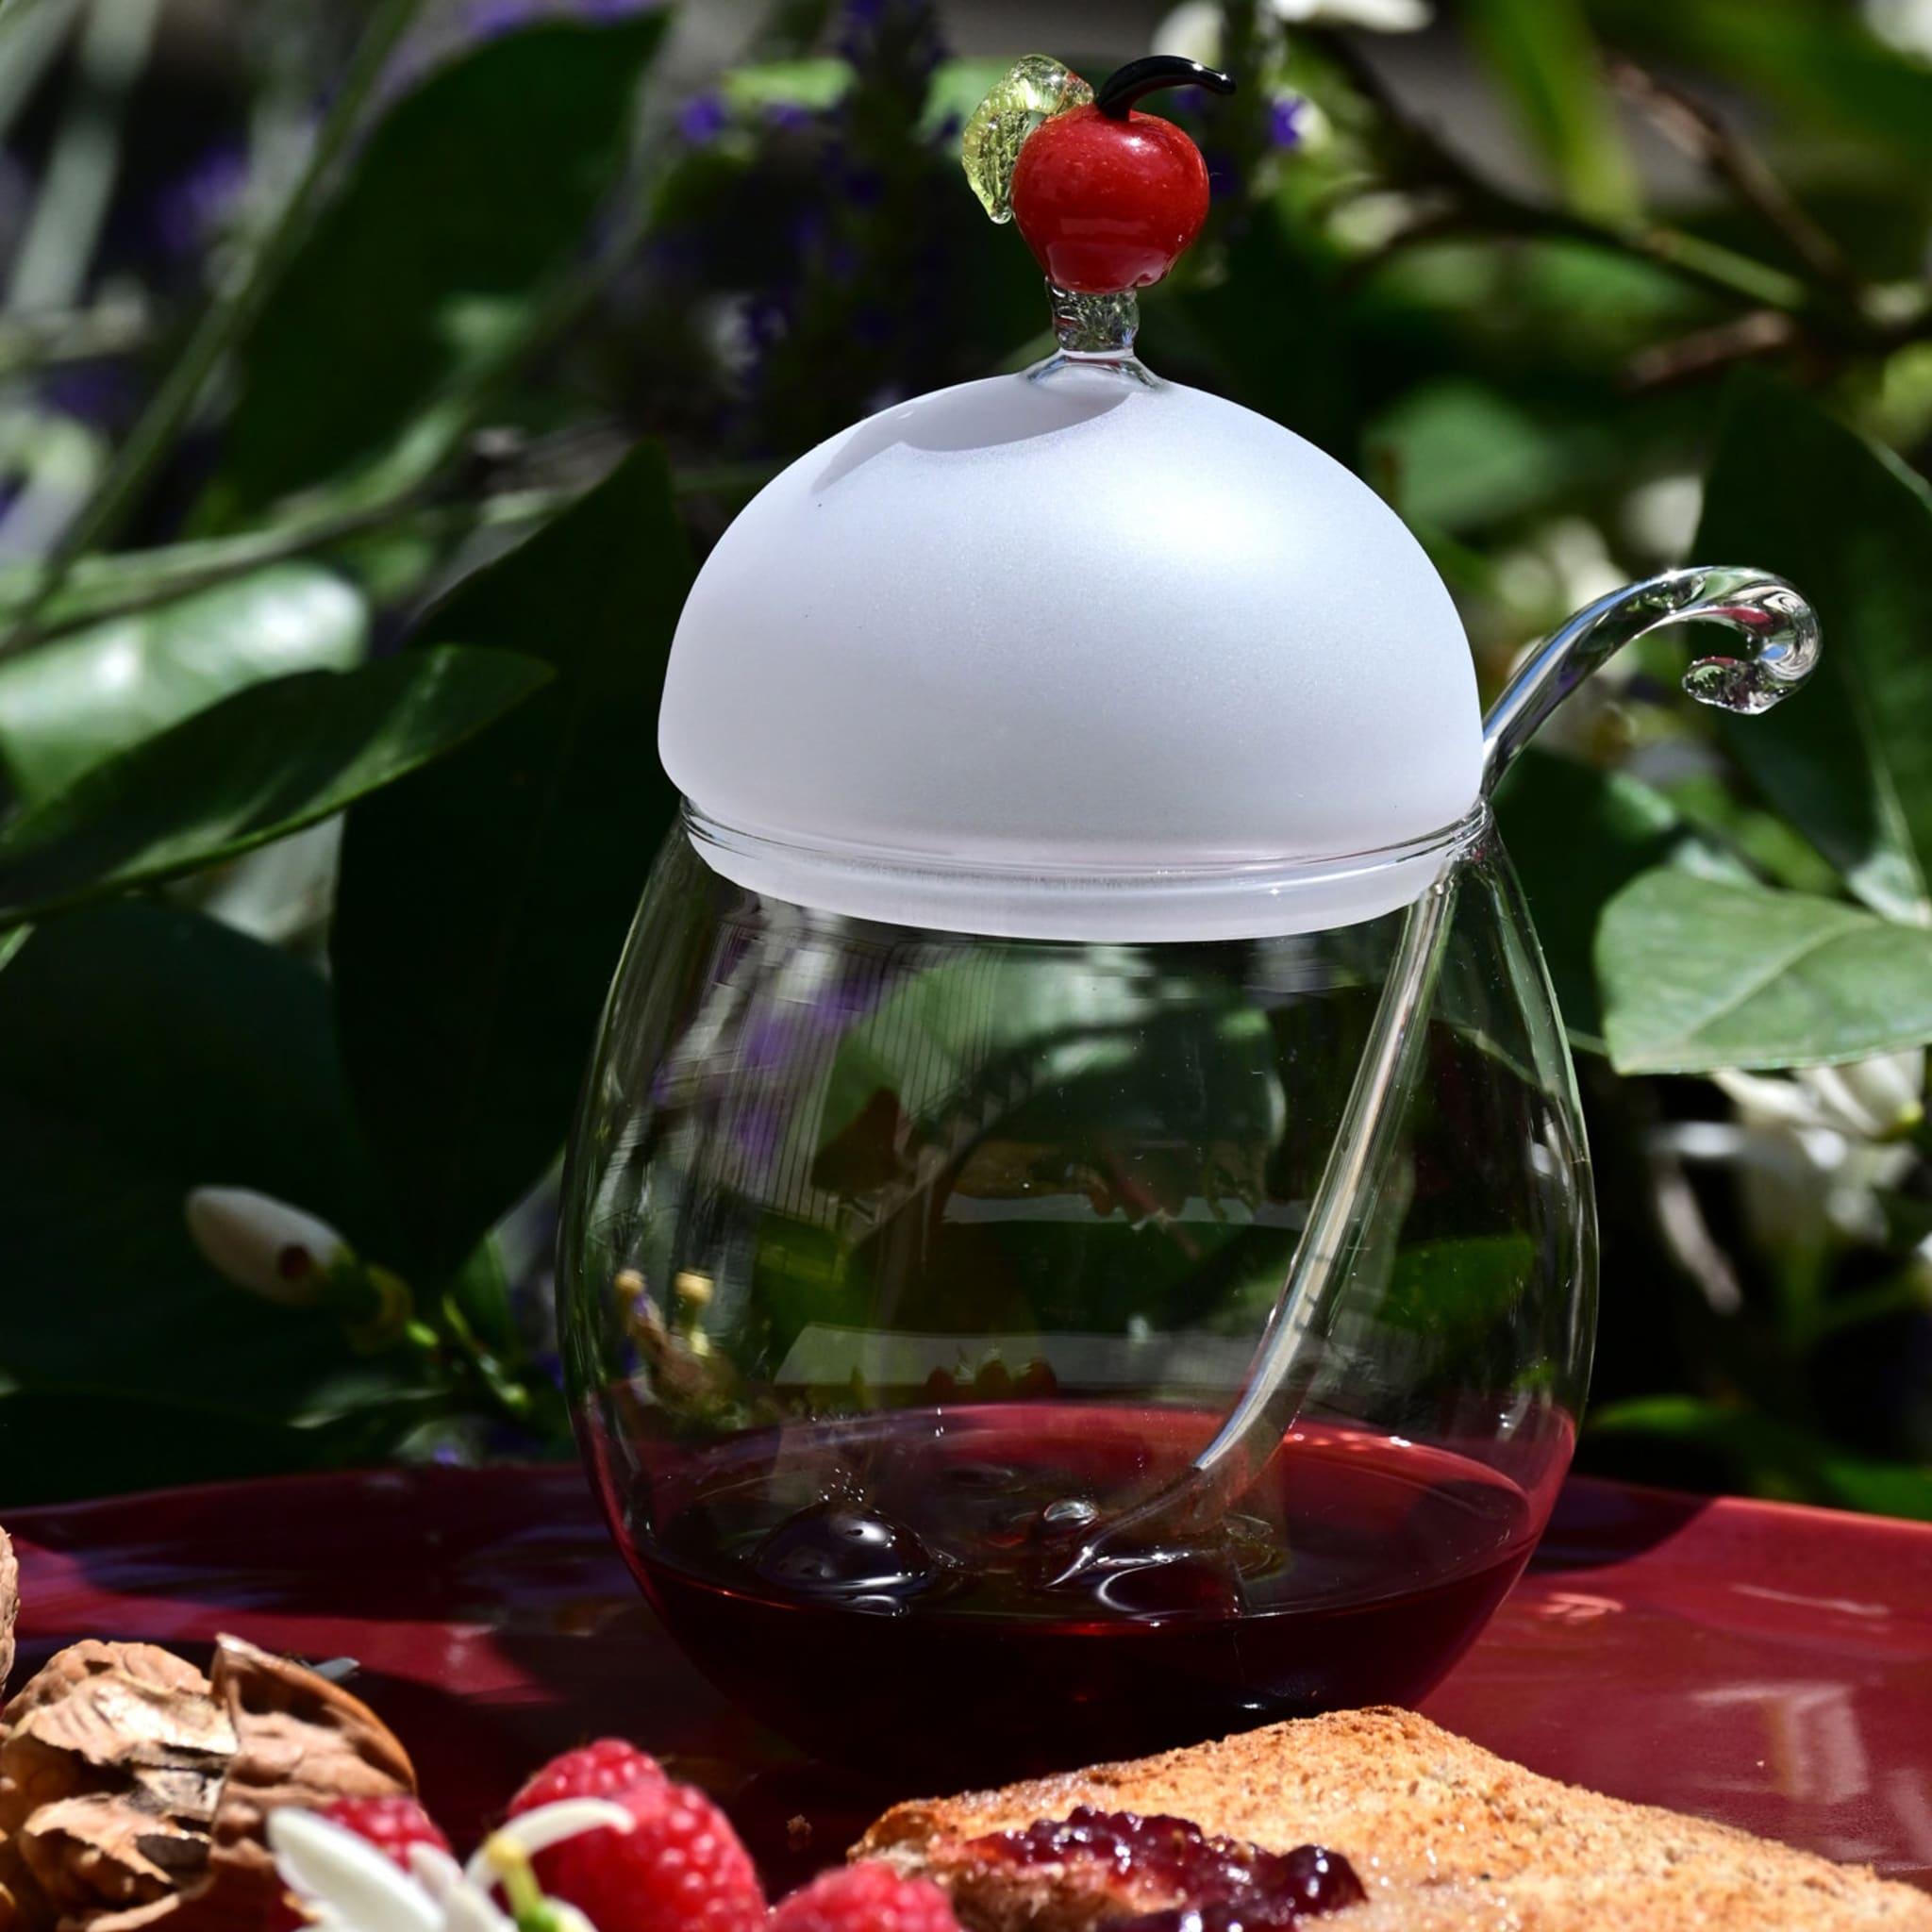 Serve and store jam, confiture, and preserves in this delicate, romantic, granny-style pot with a matching, transparent glass spoon. Its frosted glass cover is topped by a whimsical red apple. It takes two skilled artisans to complete the item.